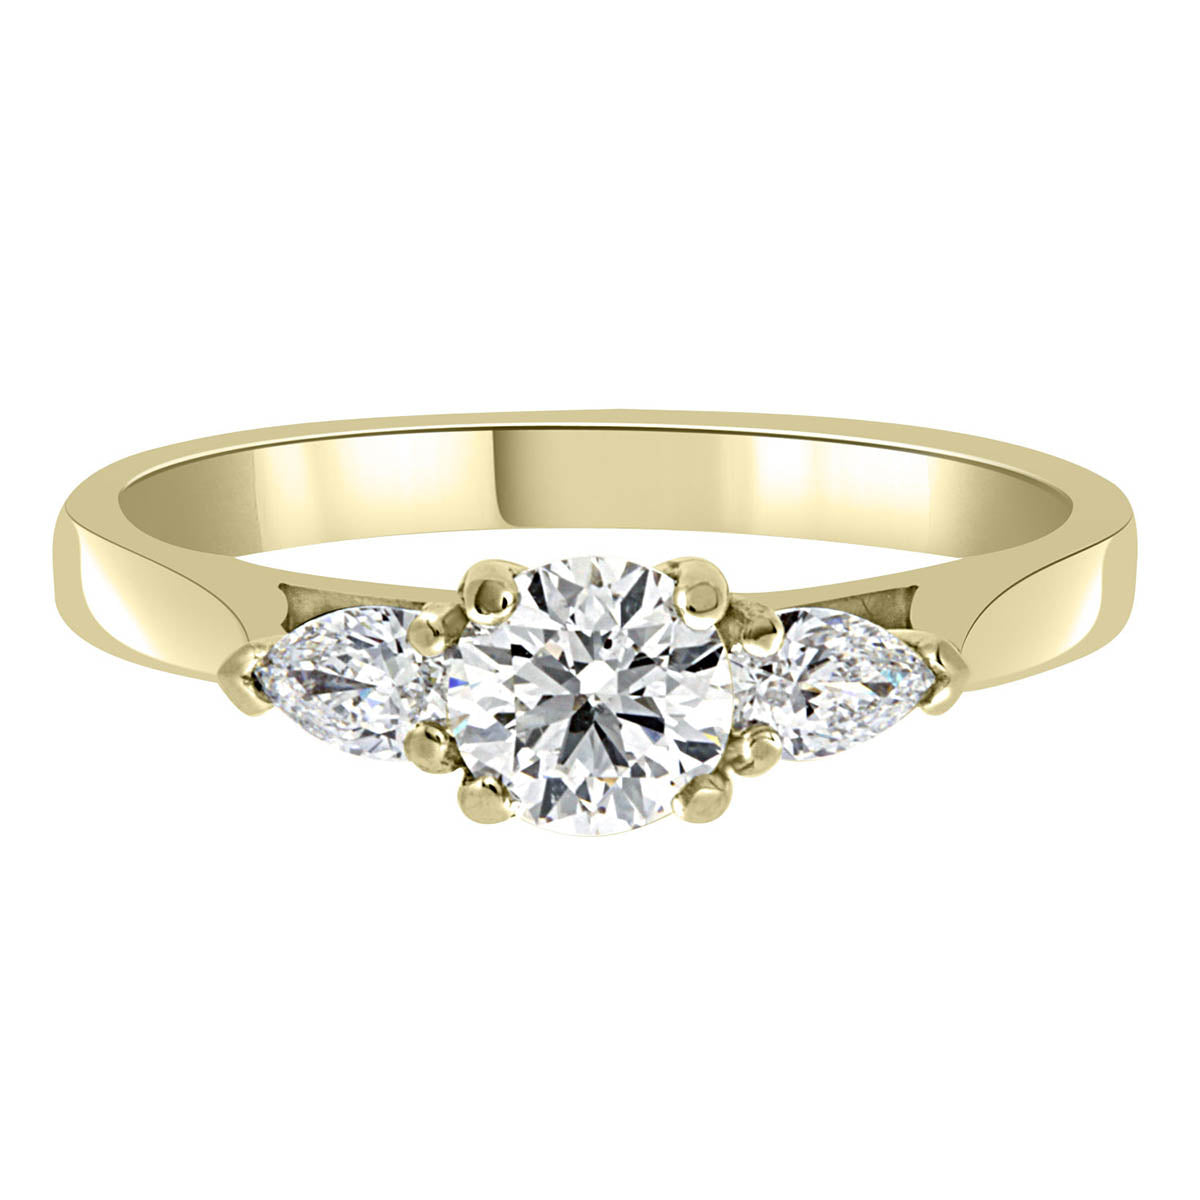 Round and Pear Diamond Ring in yellow gold